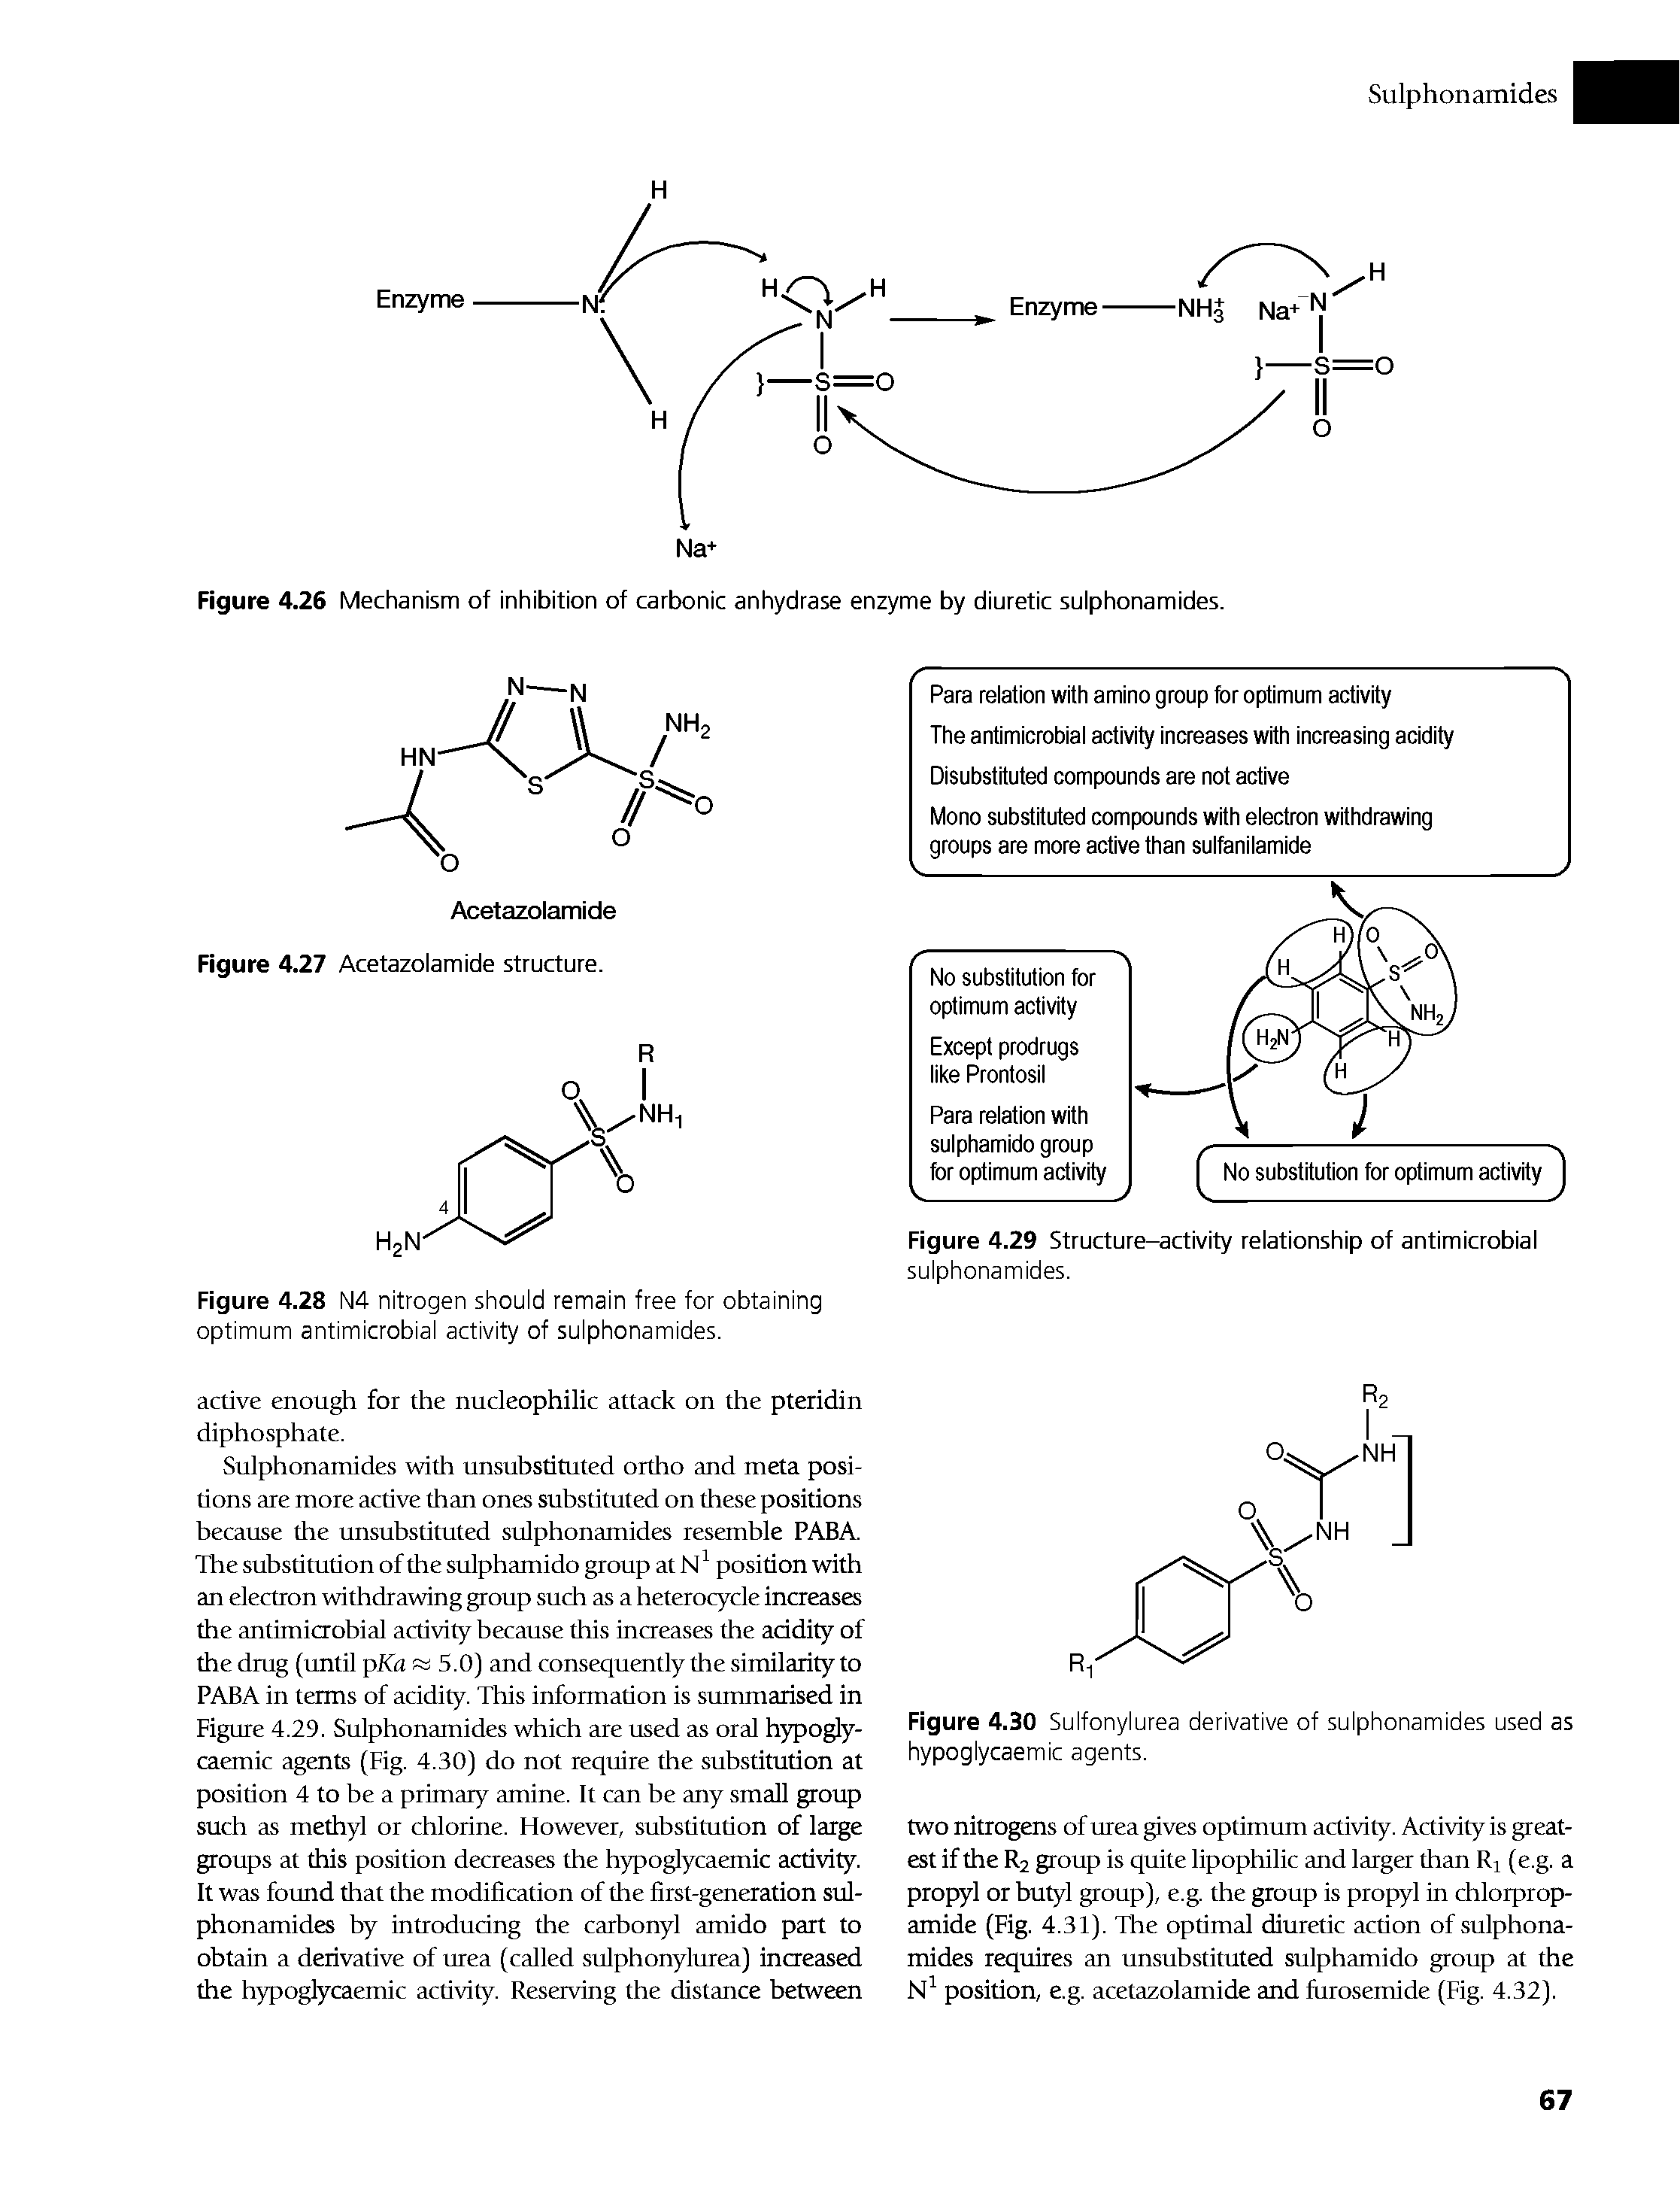 Figure 4.26 Mechanism of inhibition of carbonic anhydrase enzyme by diuretic sulphonamides.